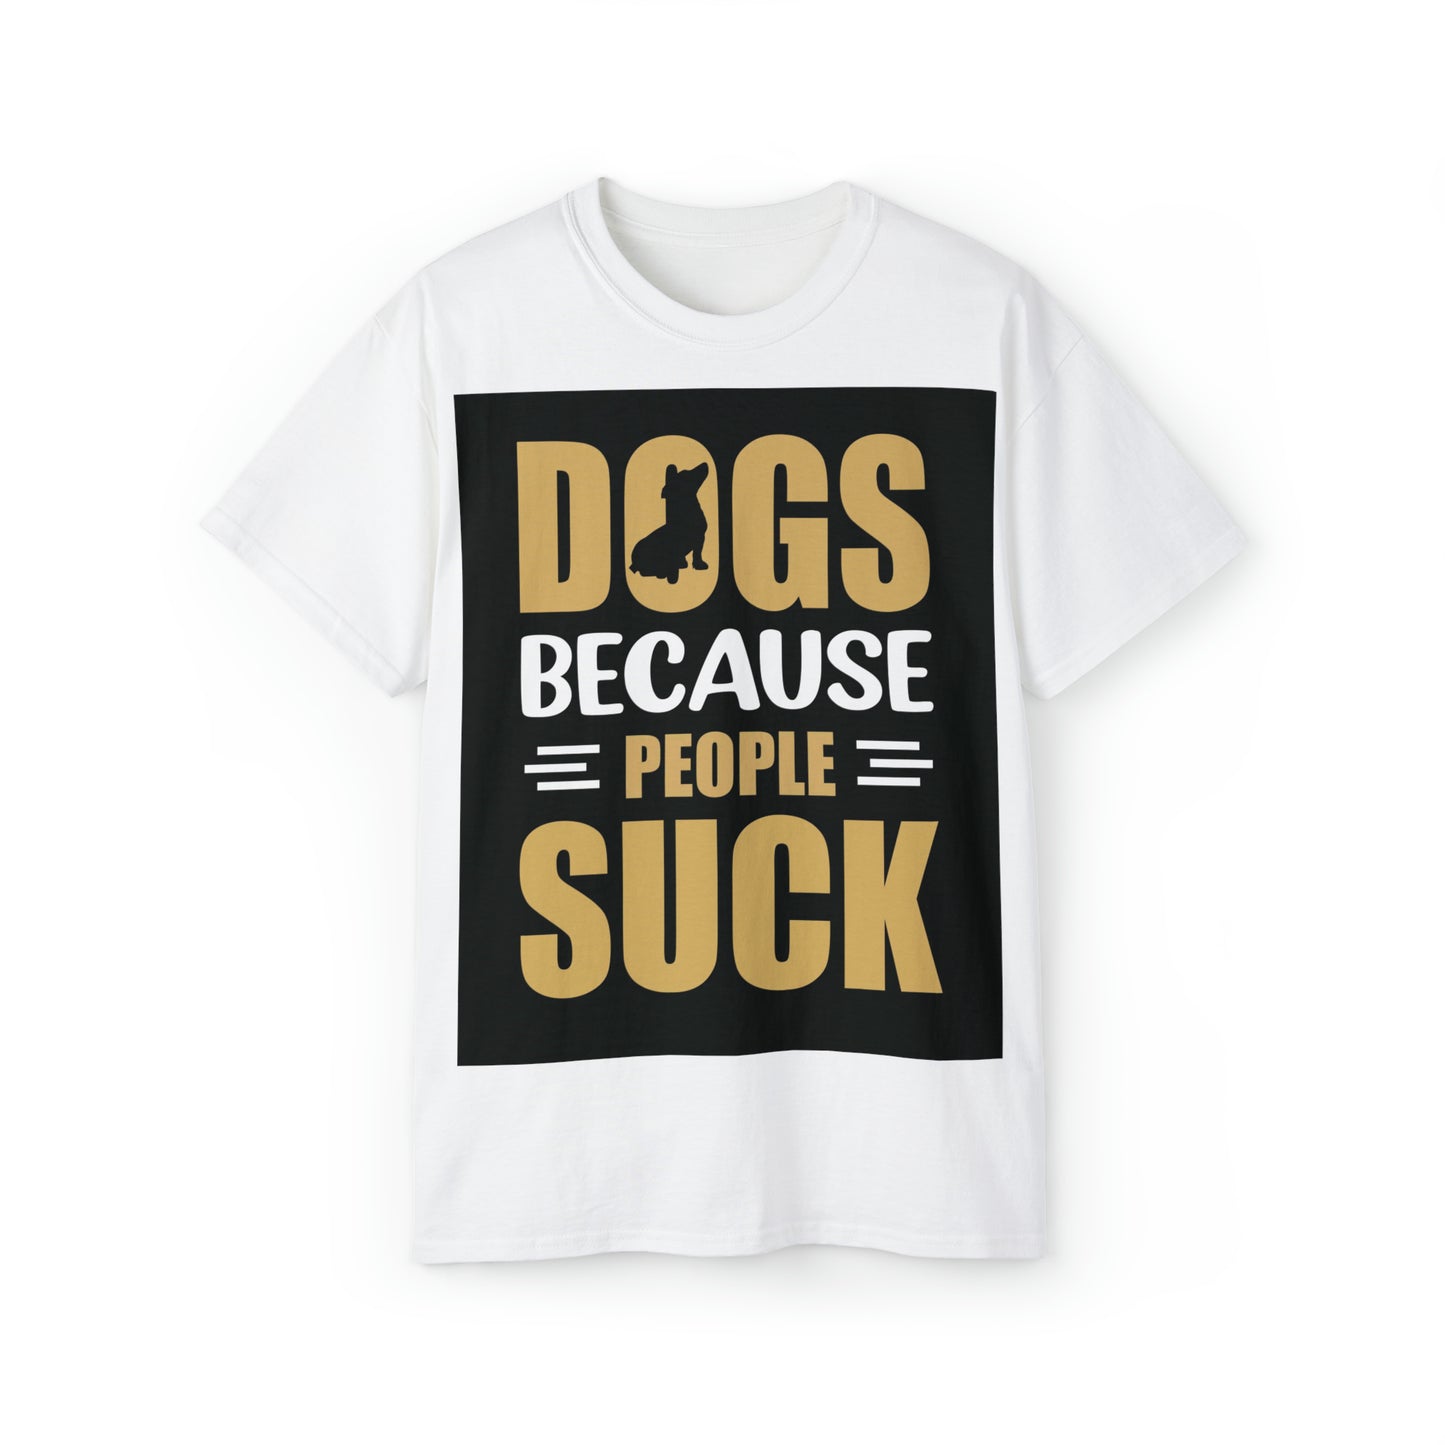 DOGS BECAUSE Ultra Cotton Tee